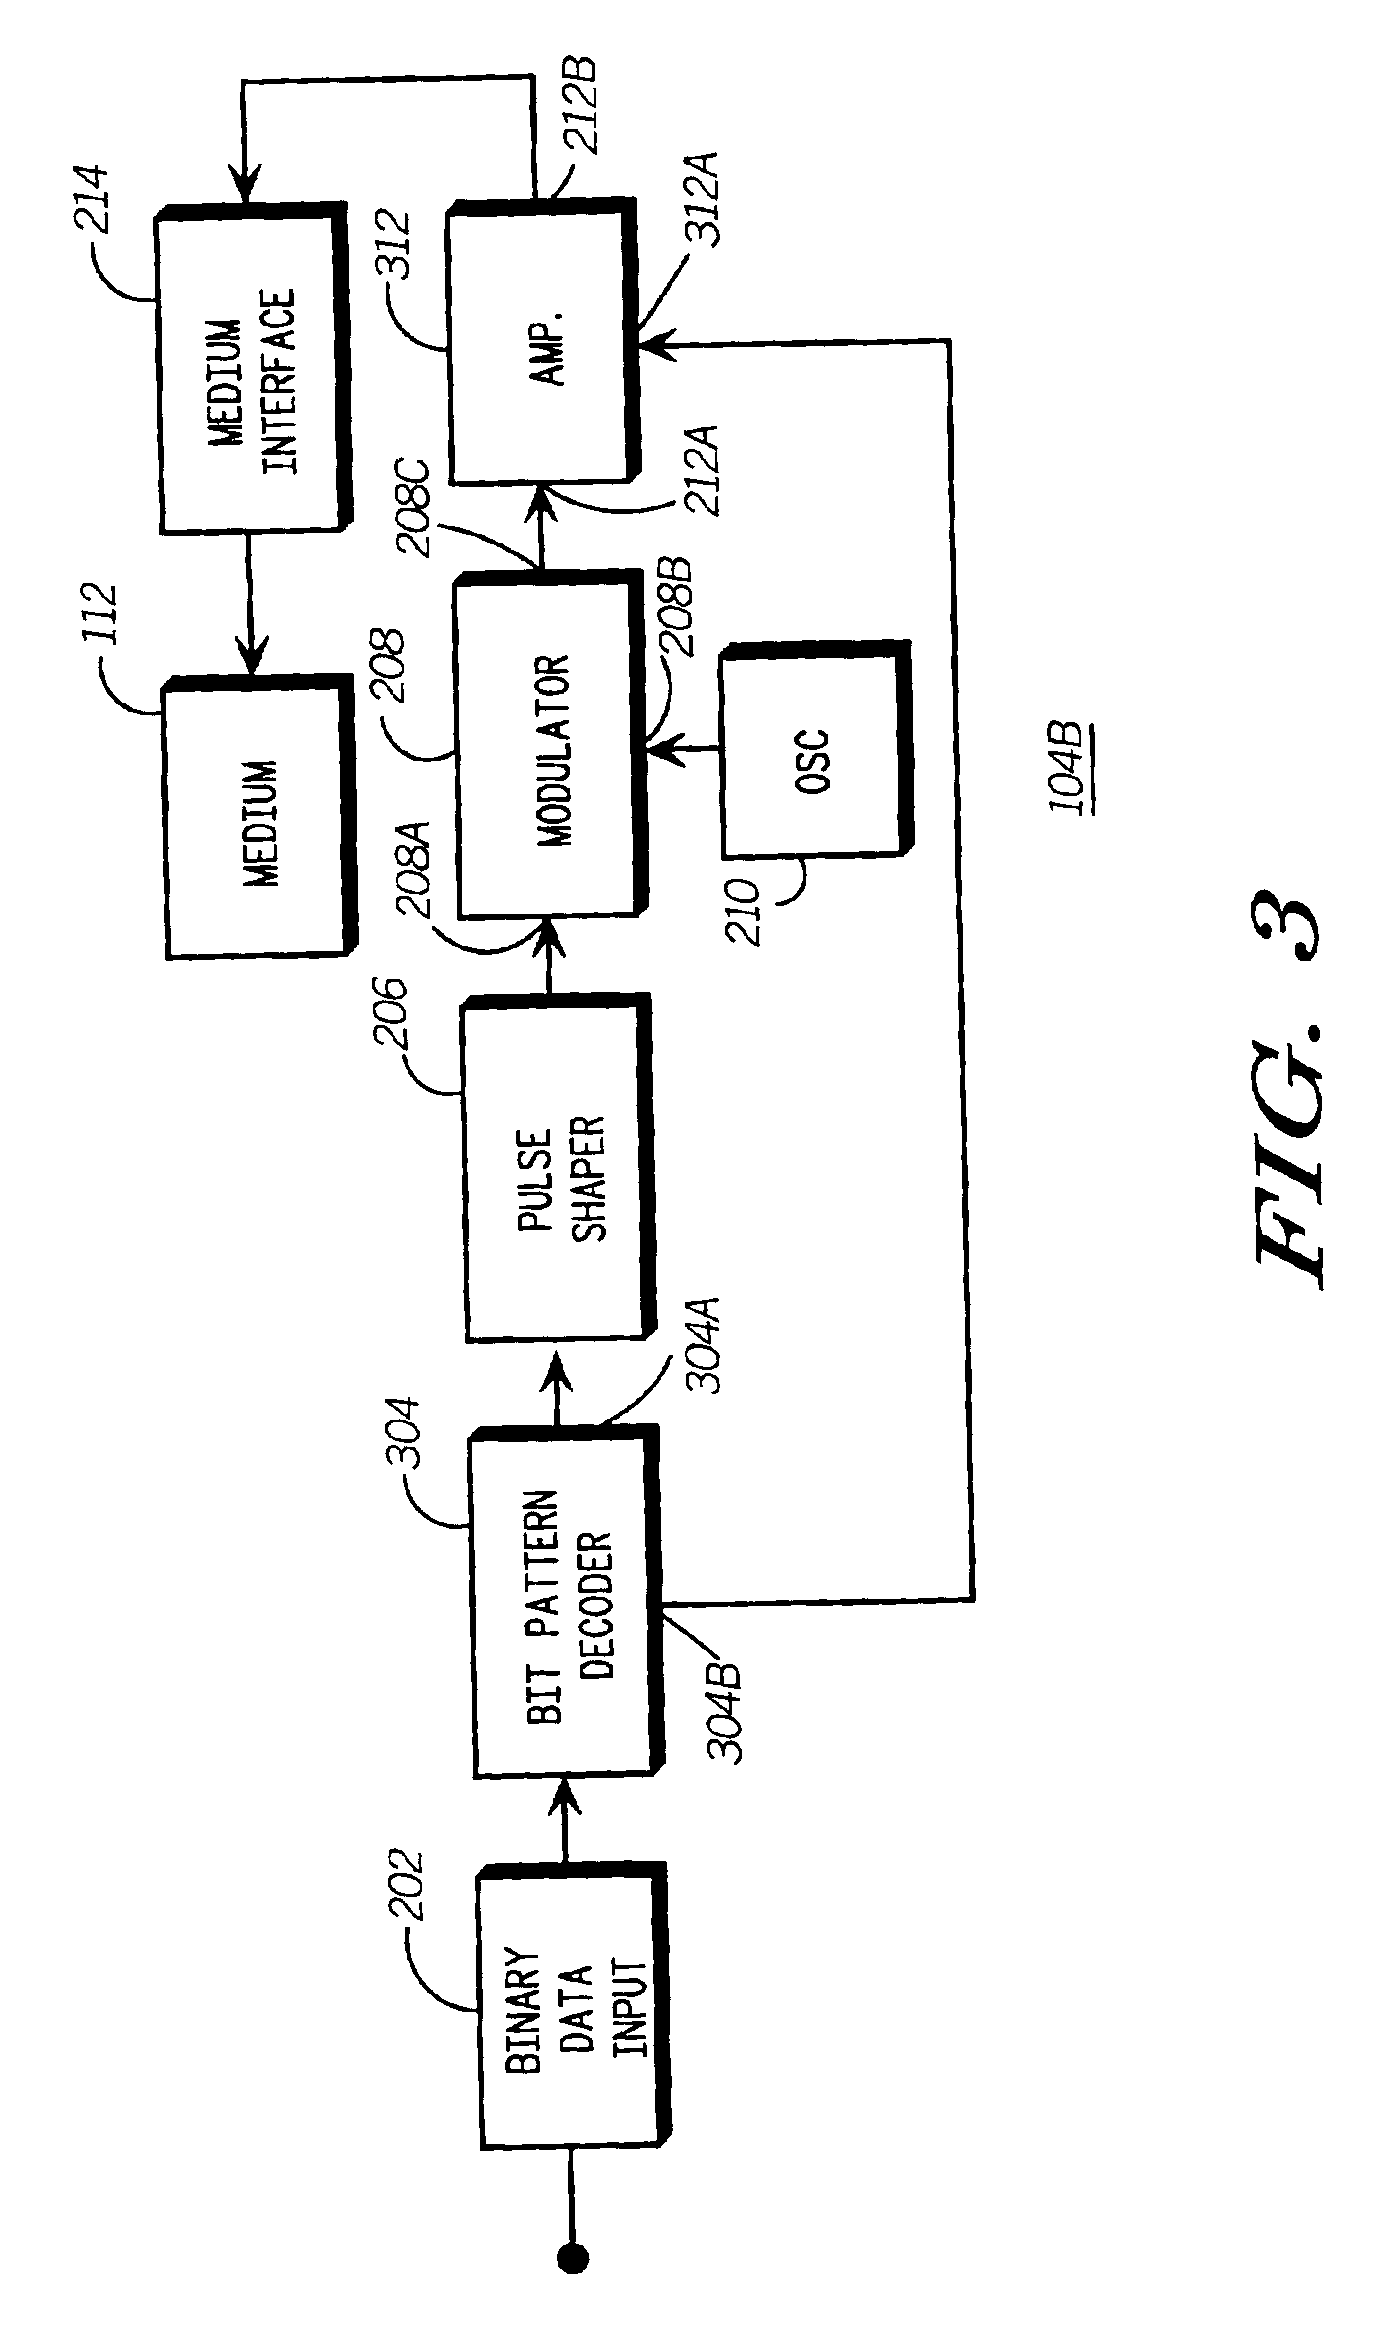 System for code division multi-access communication